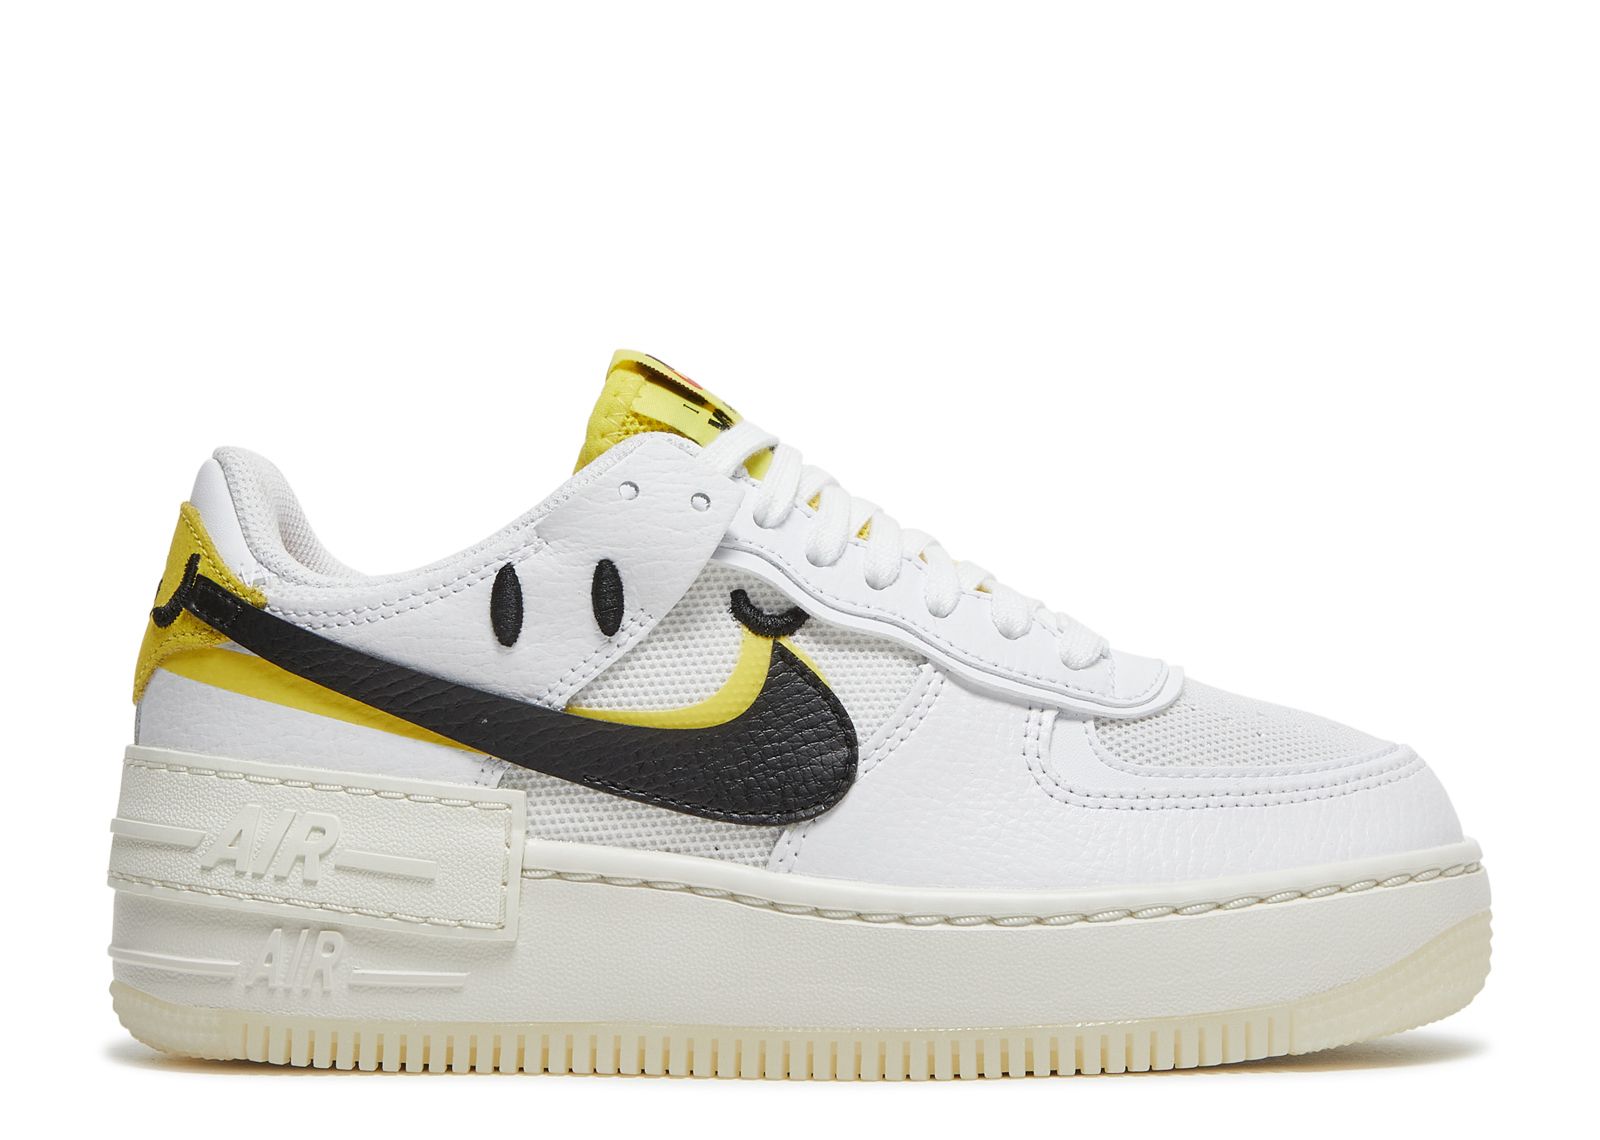 Кроссовки Nike Wmns Air Force 1 Shadow 'Go The Extra Smile', белый кроссовки nike air force 1 shadow бело серый